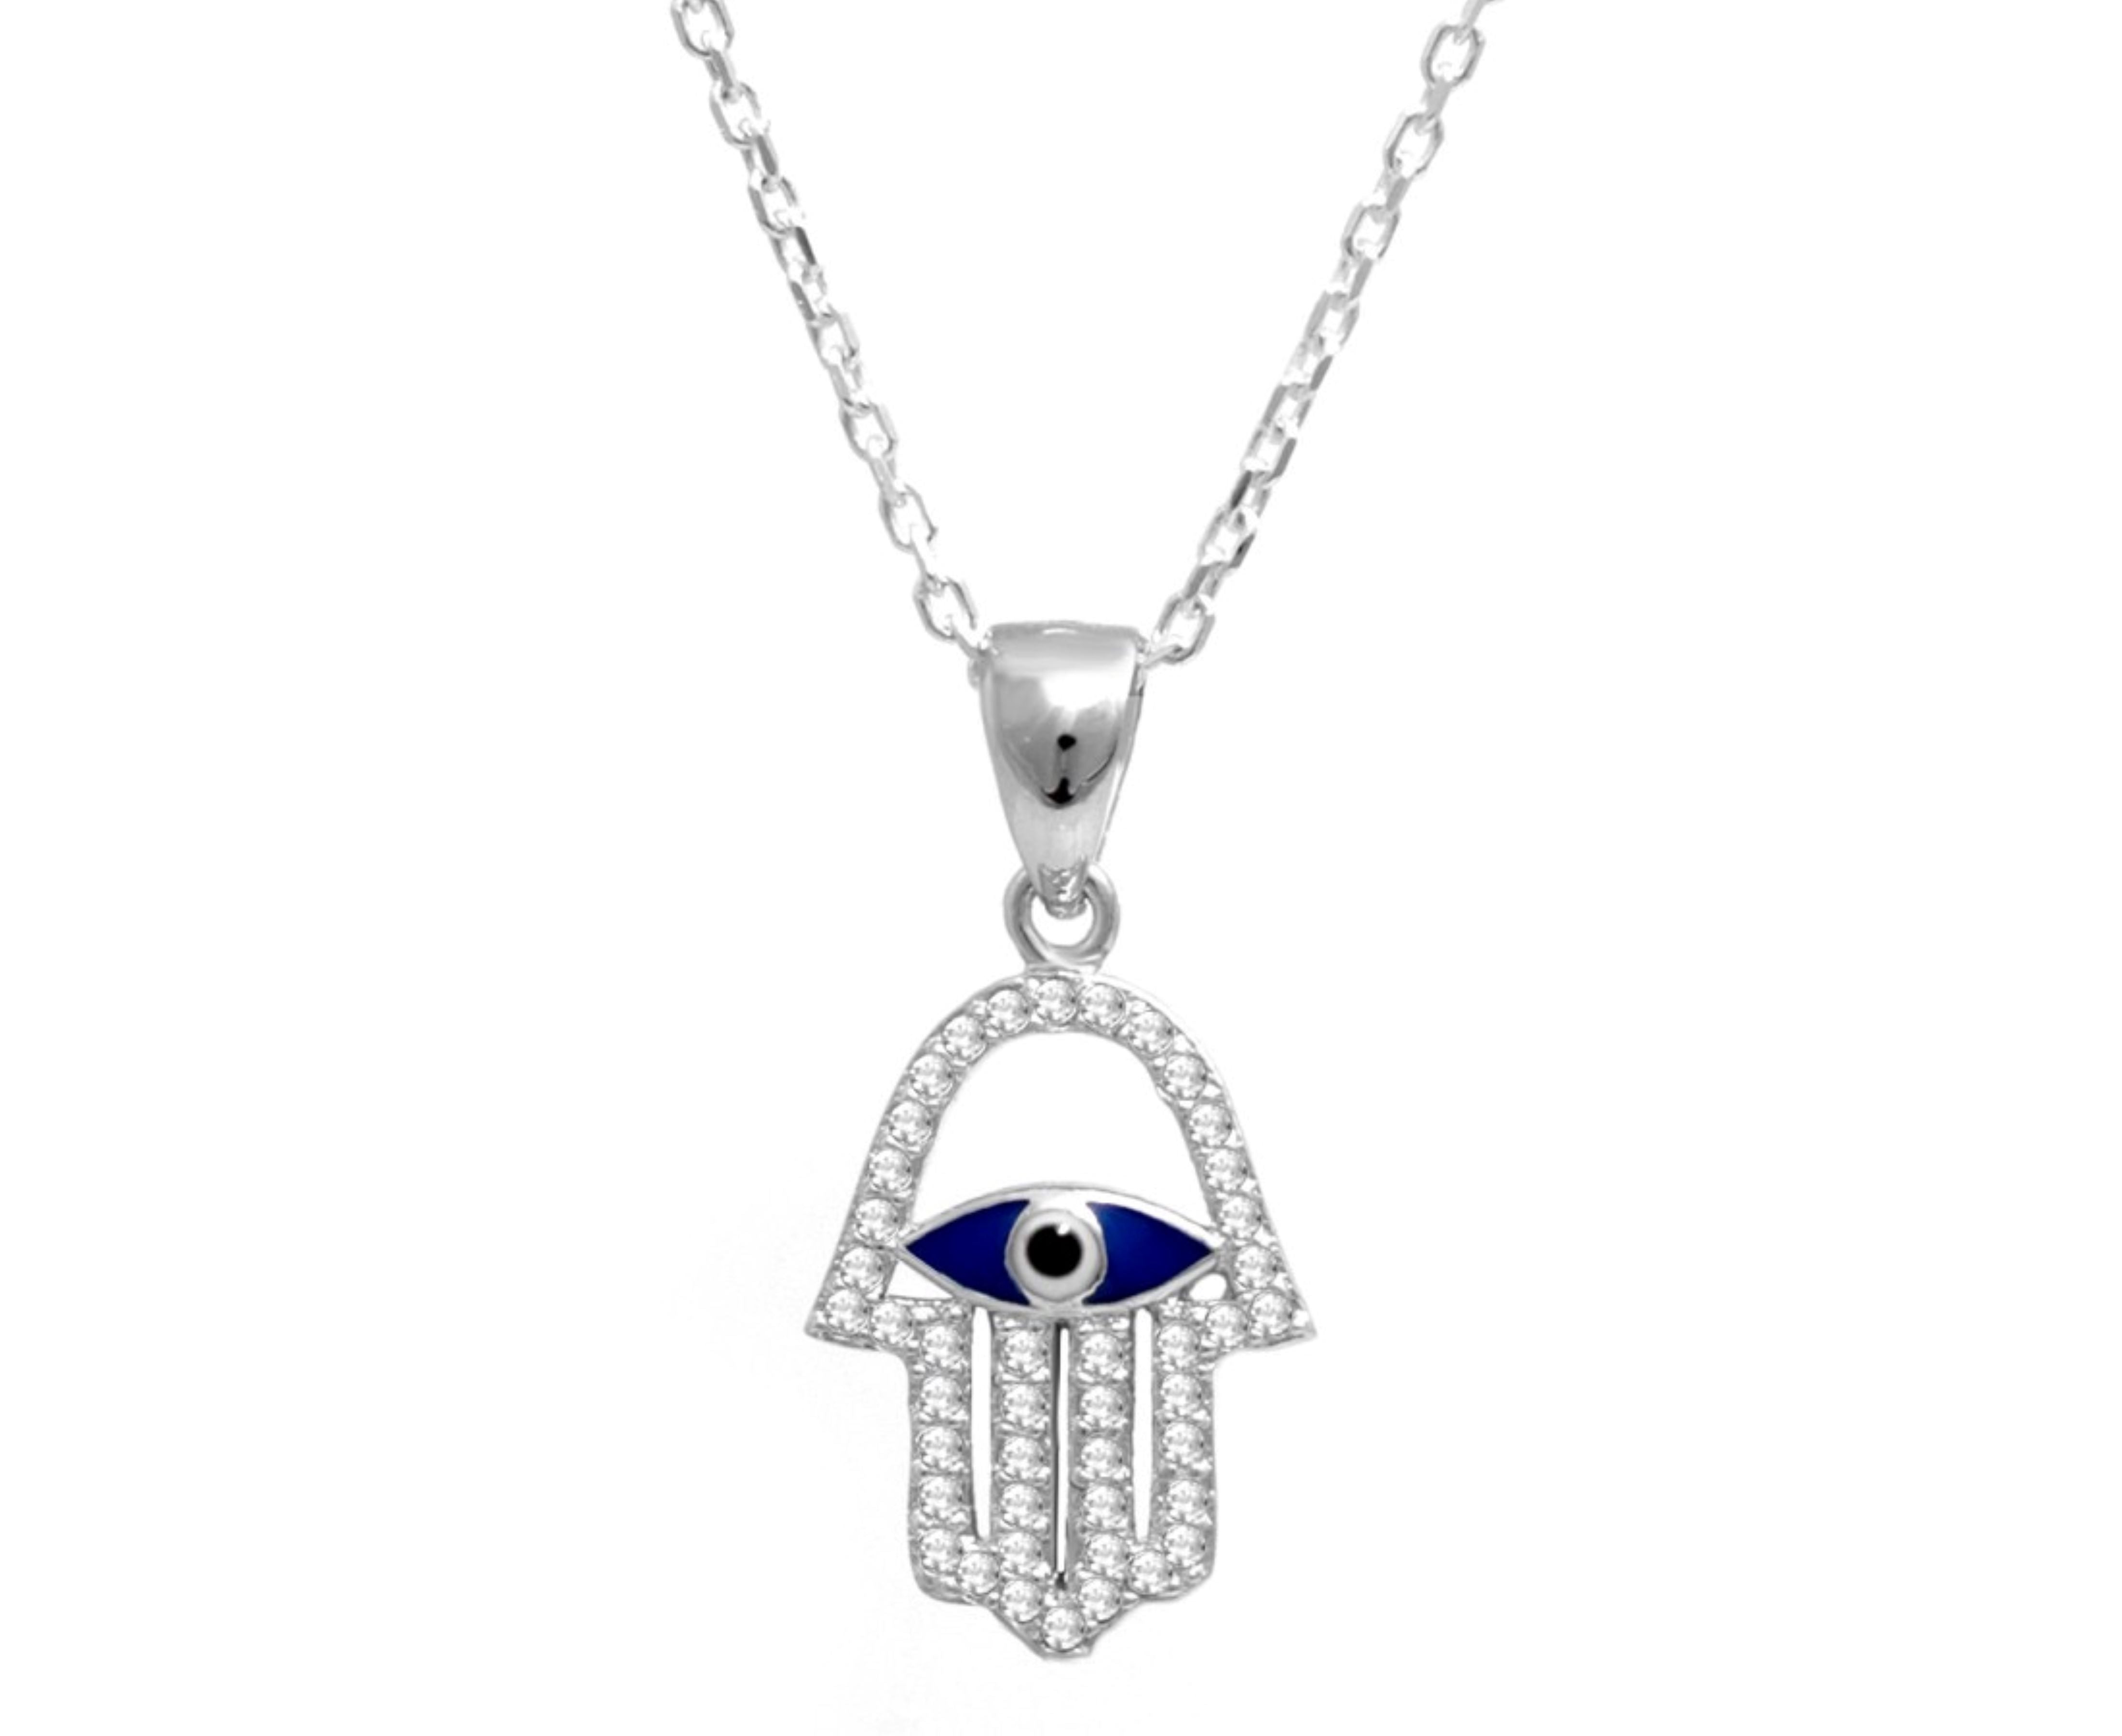 Lucky evil eye hamsa necklace in sterling silver Necklaces The Crystal and Wellness Warehouse 